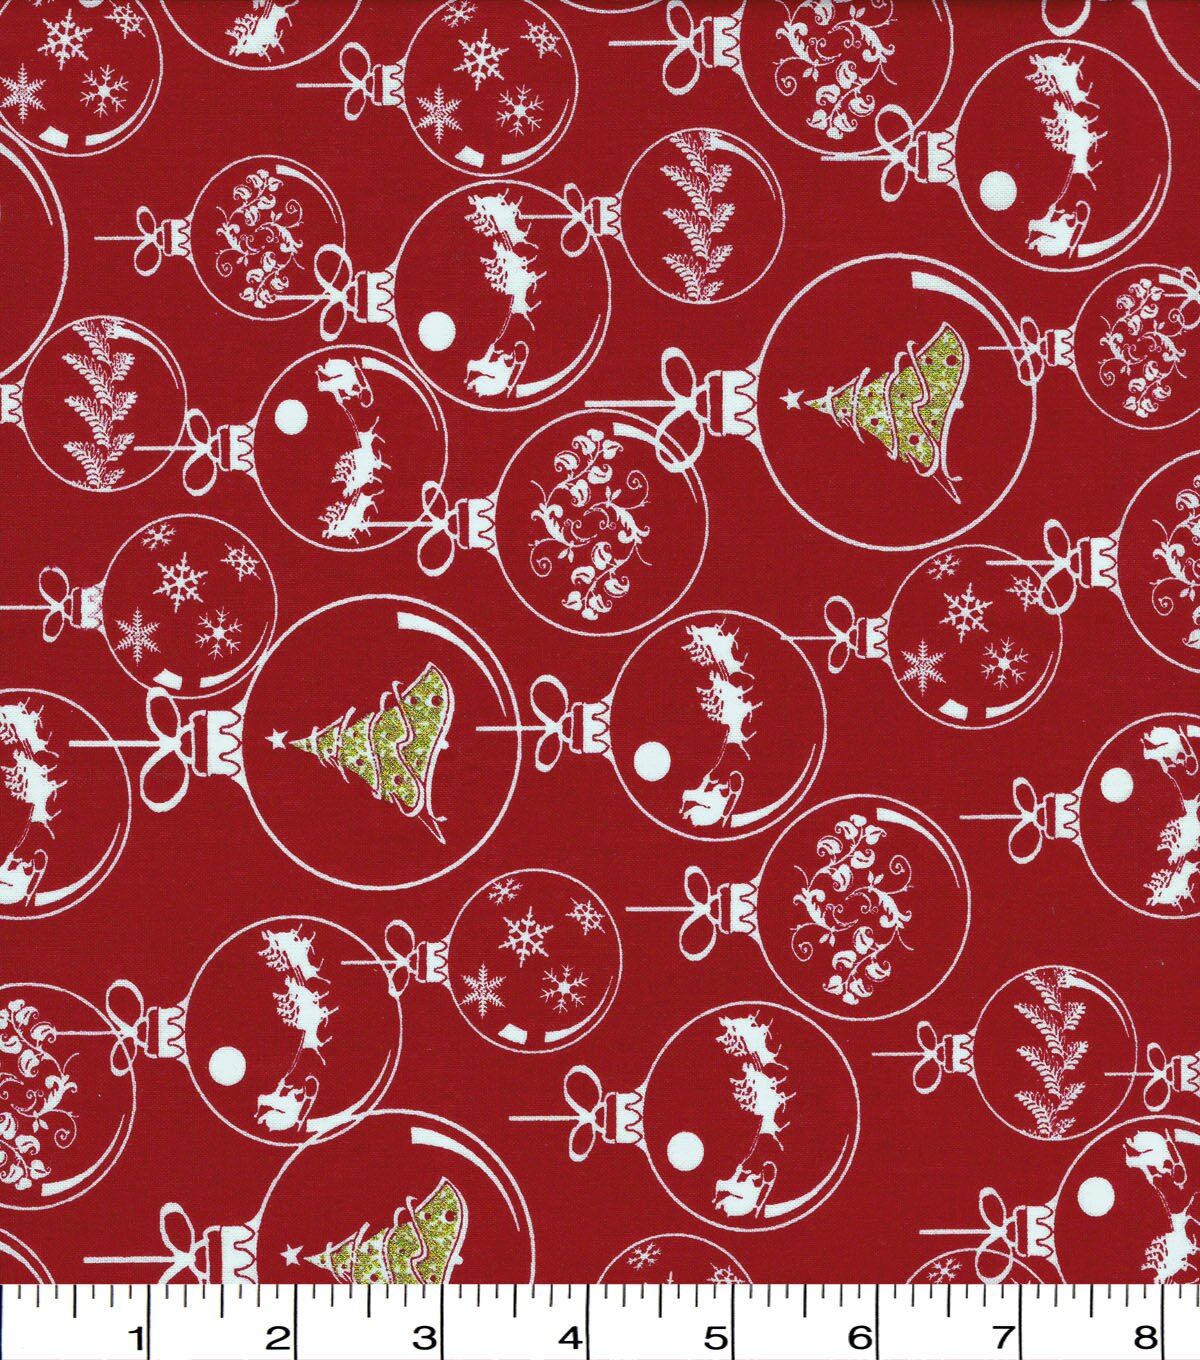 Christmas Cotton Fabric Ornaments on Red | JOANN